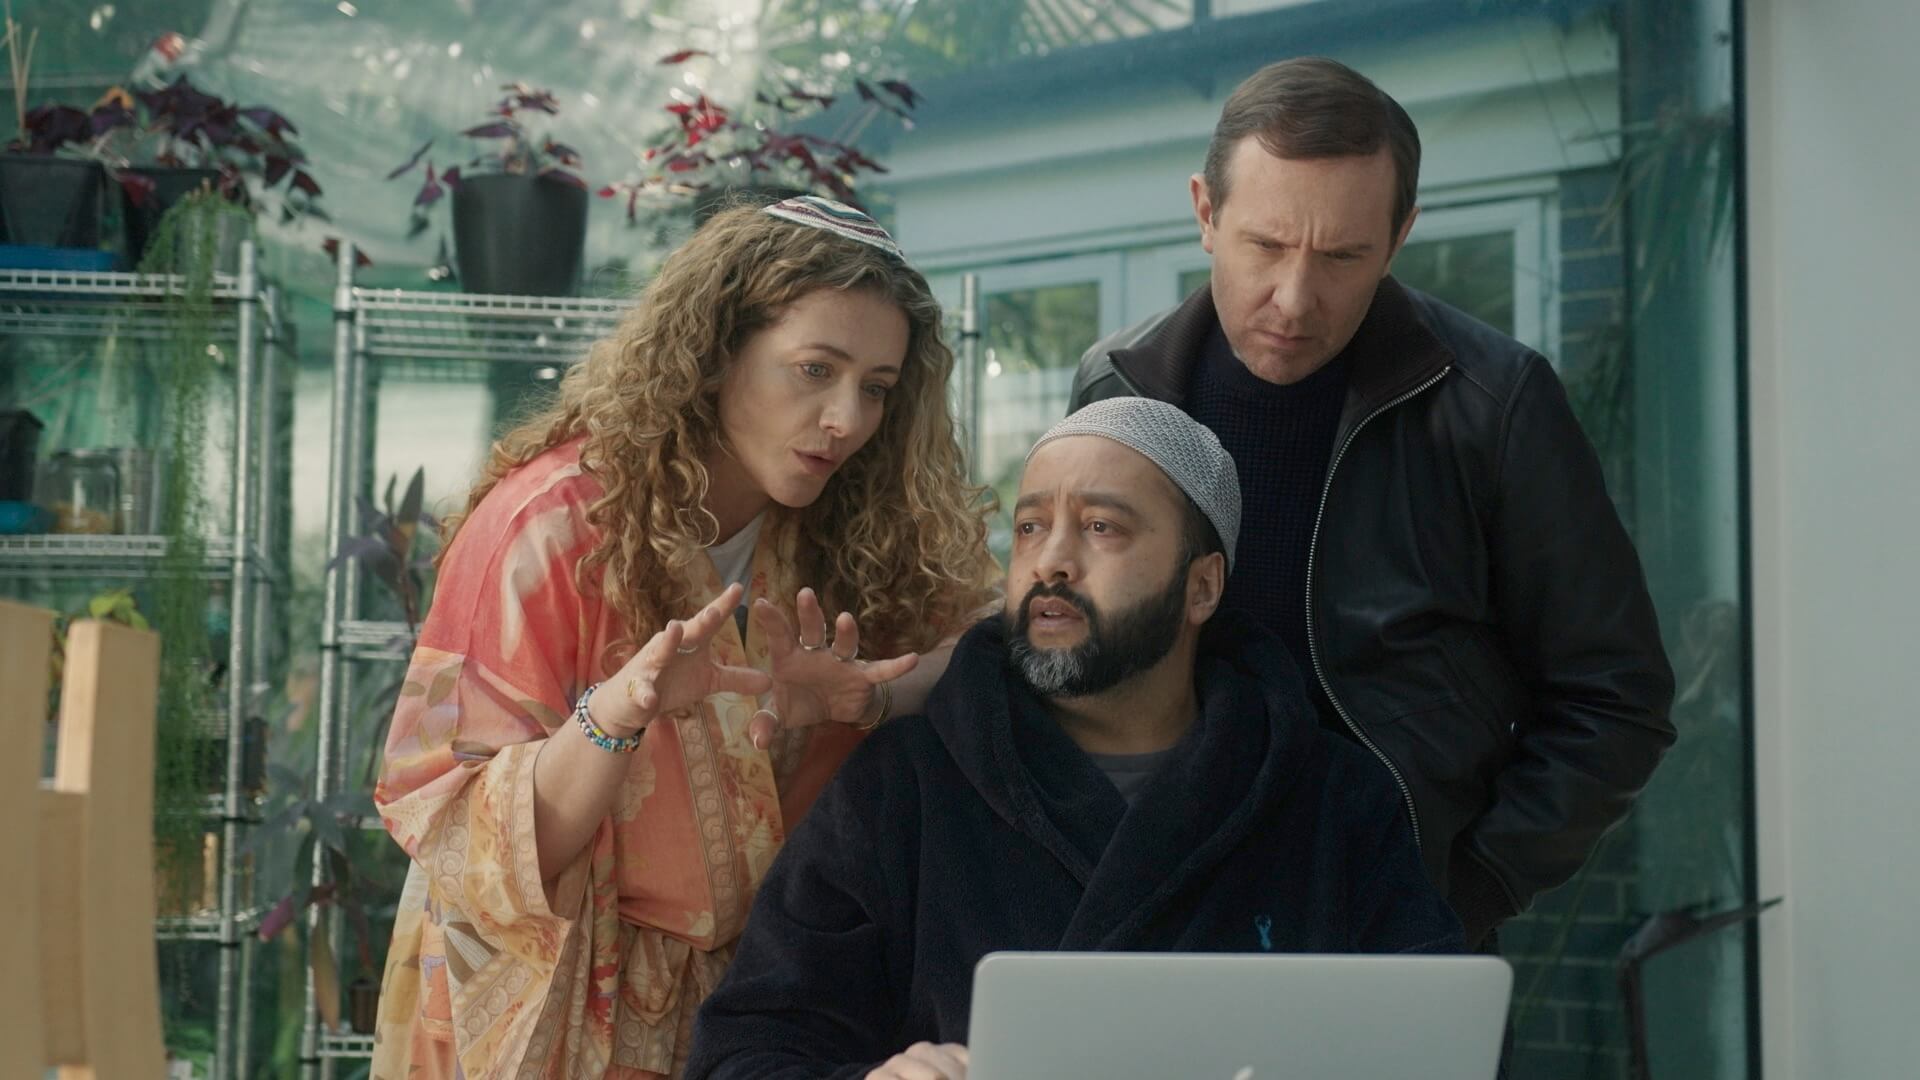 A rabbi, an imam and a Jewish journalist draft a statement responding to a terror attack in Season 2 of <i>Hapless.</i>
